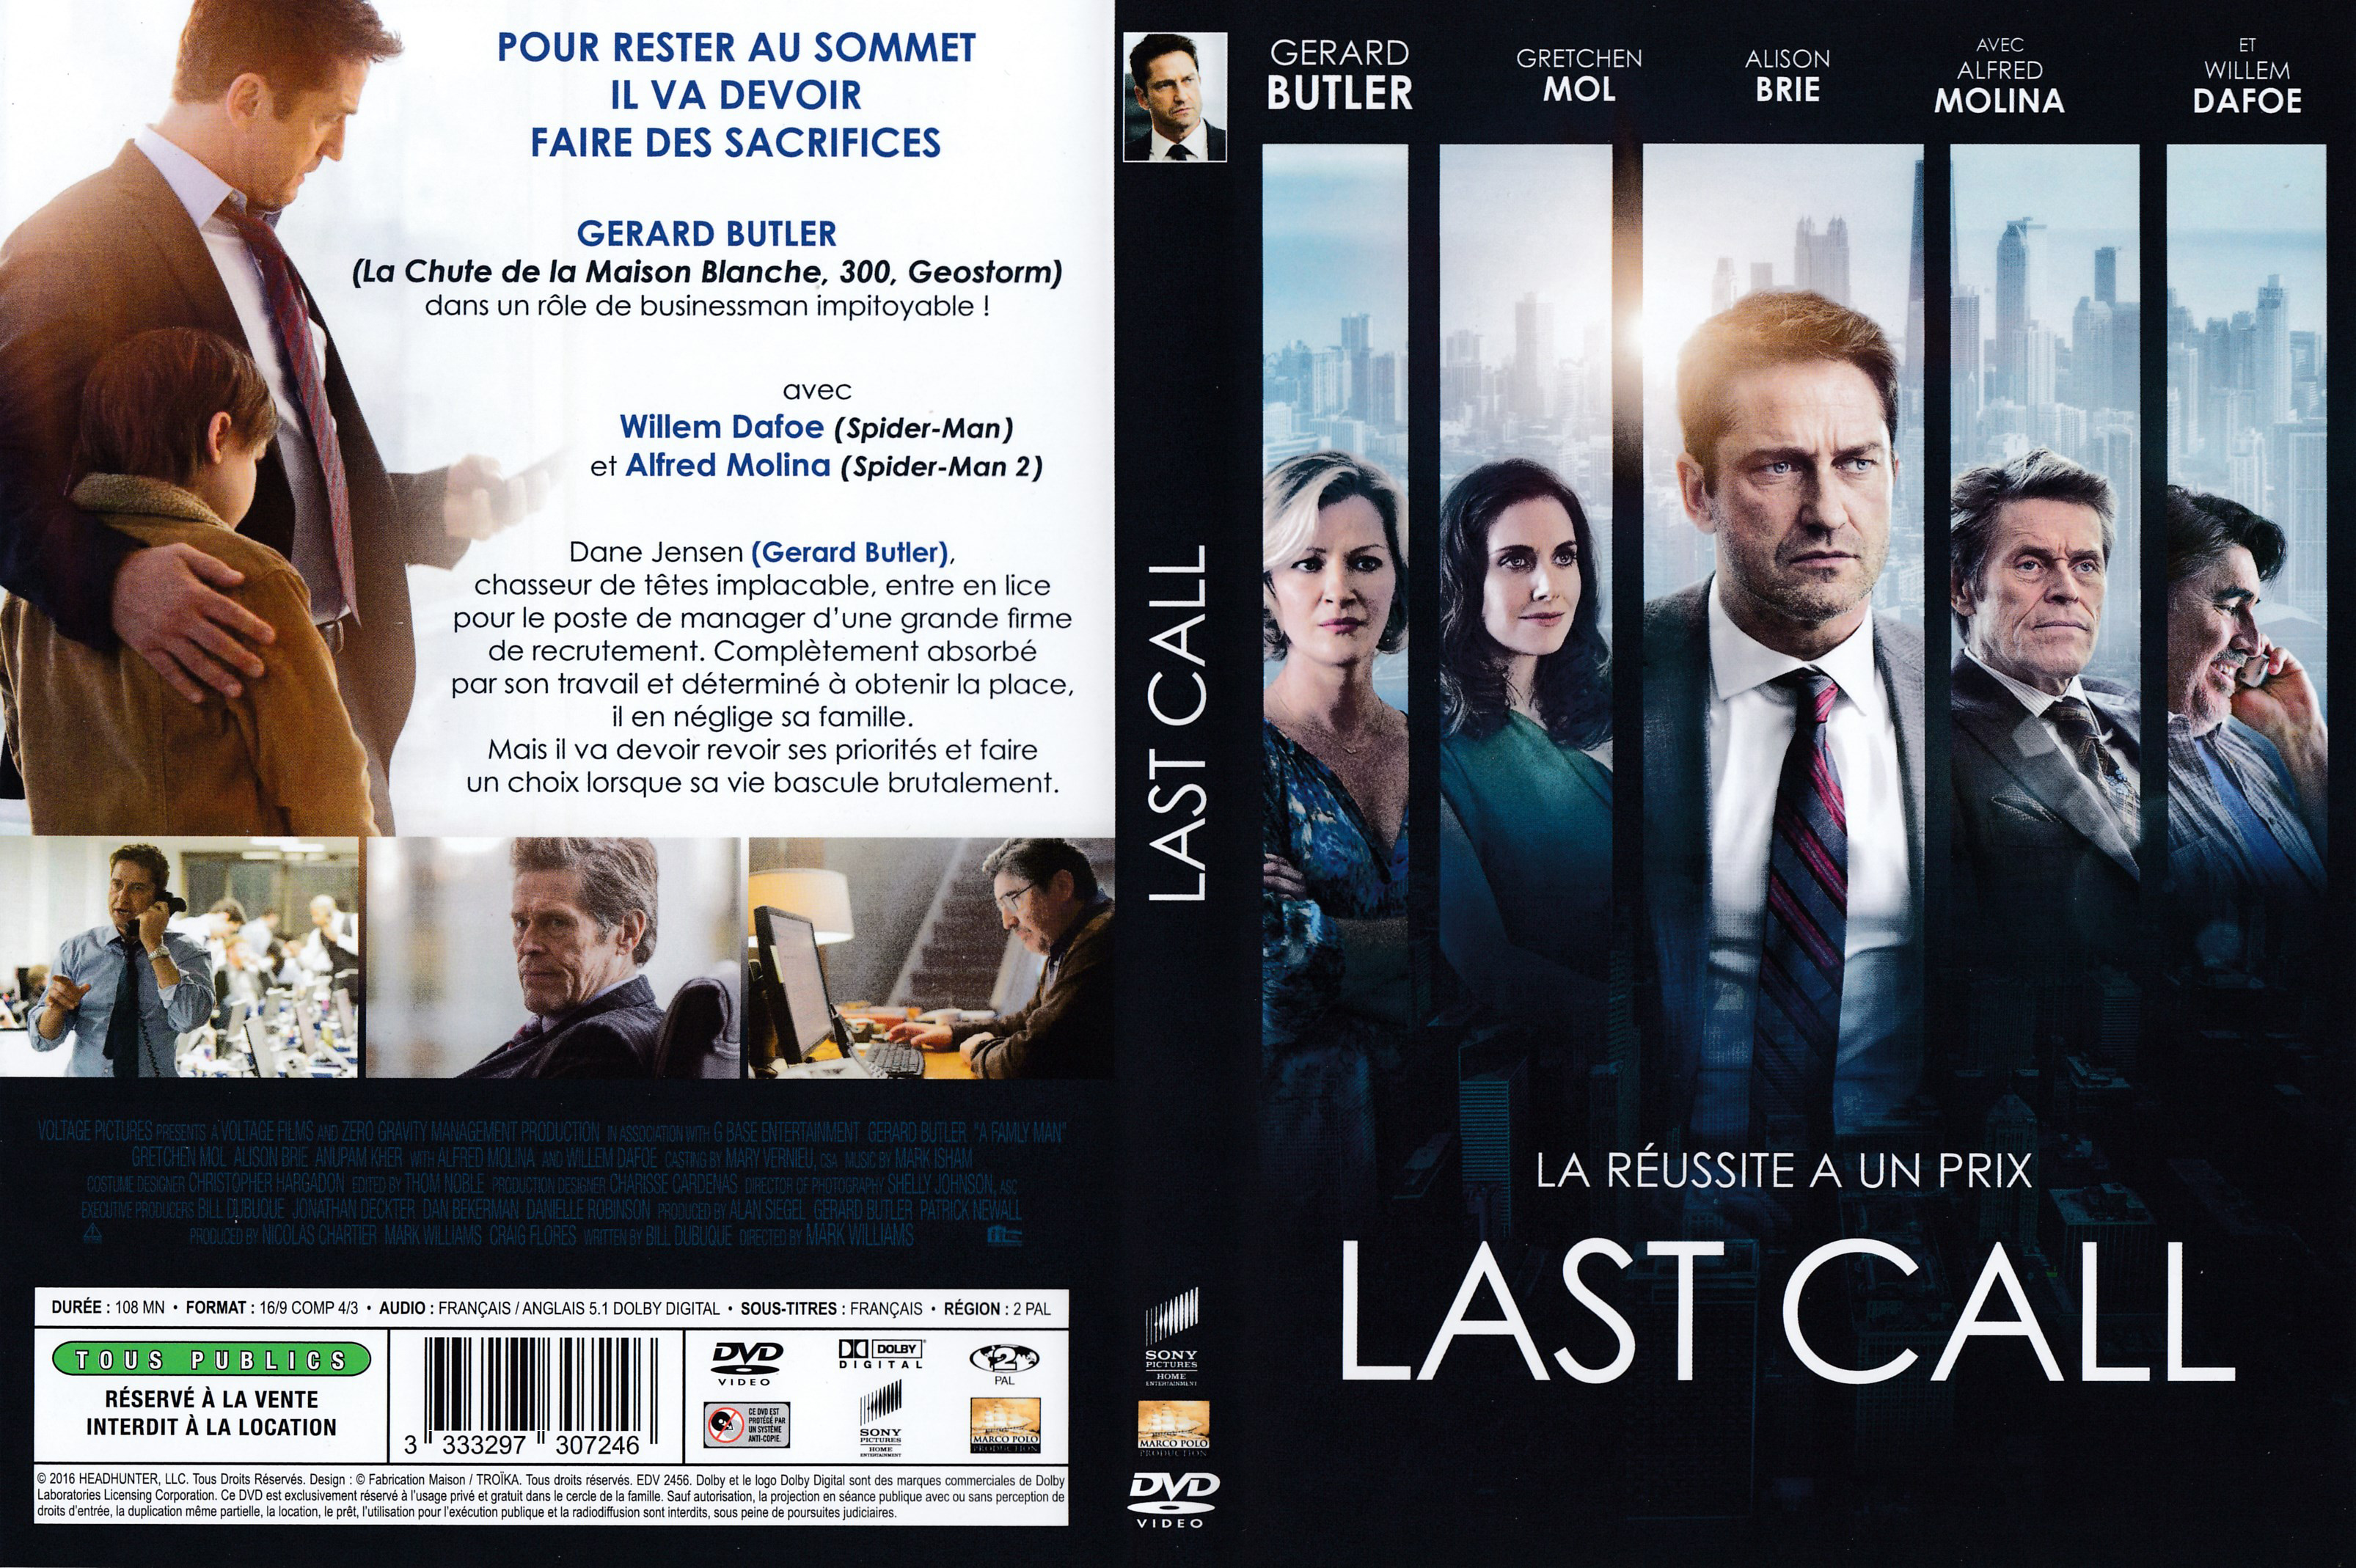 Jaquette DVD Last call